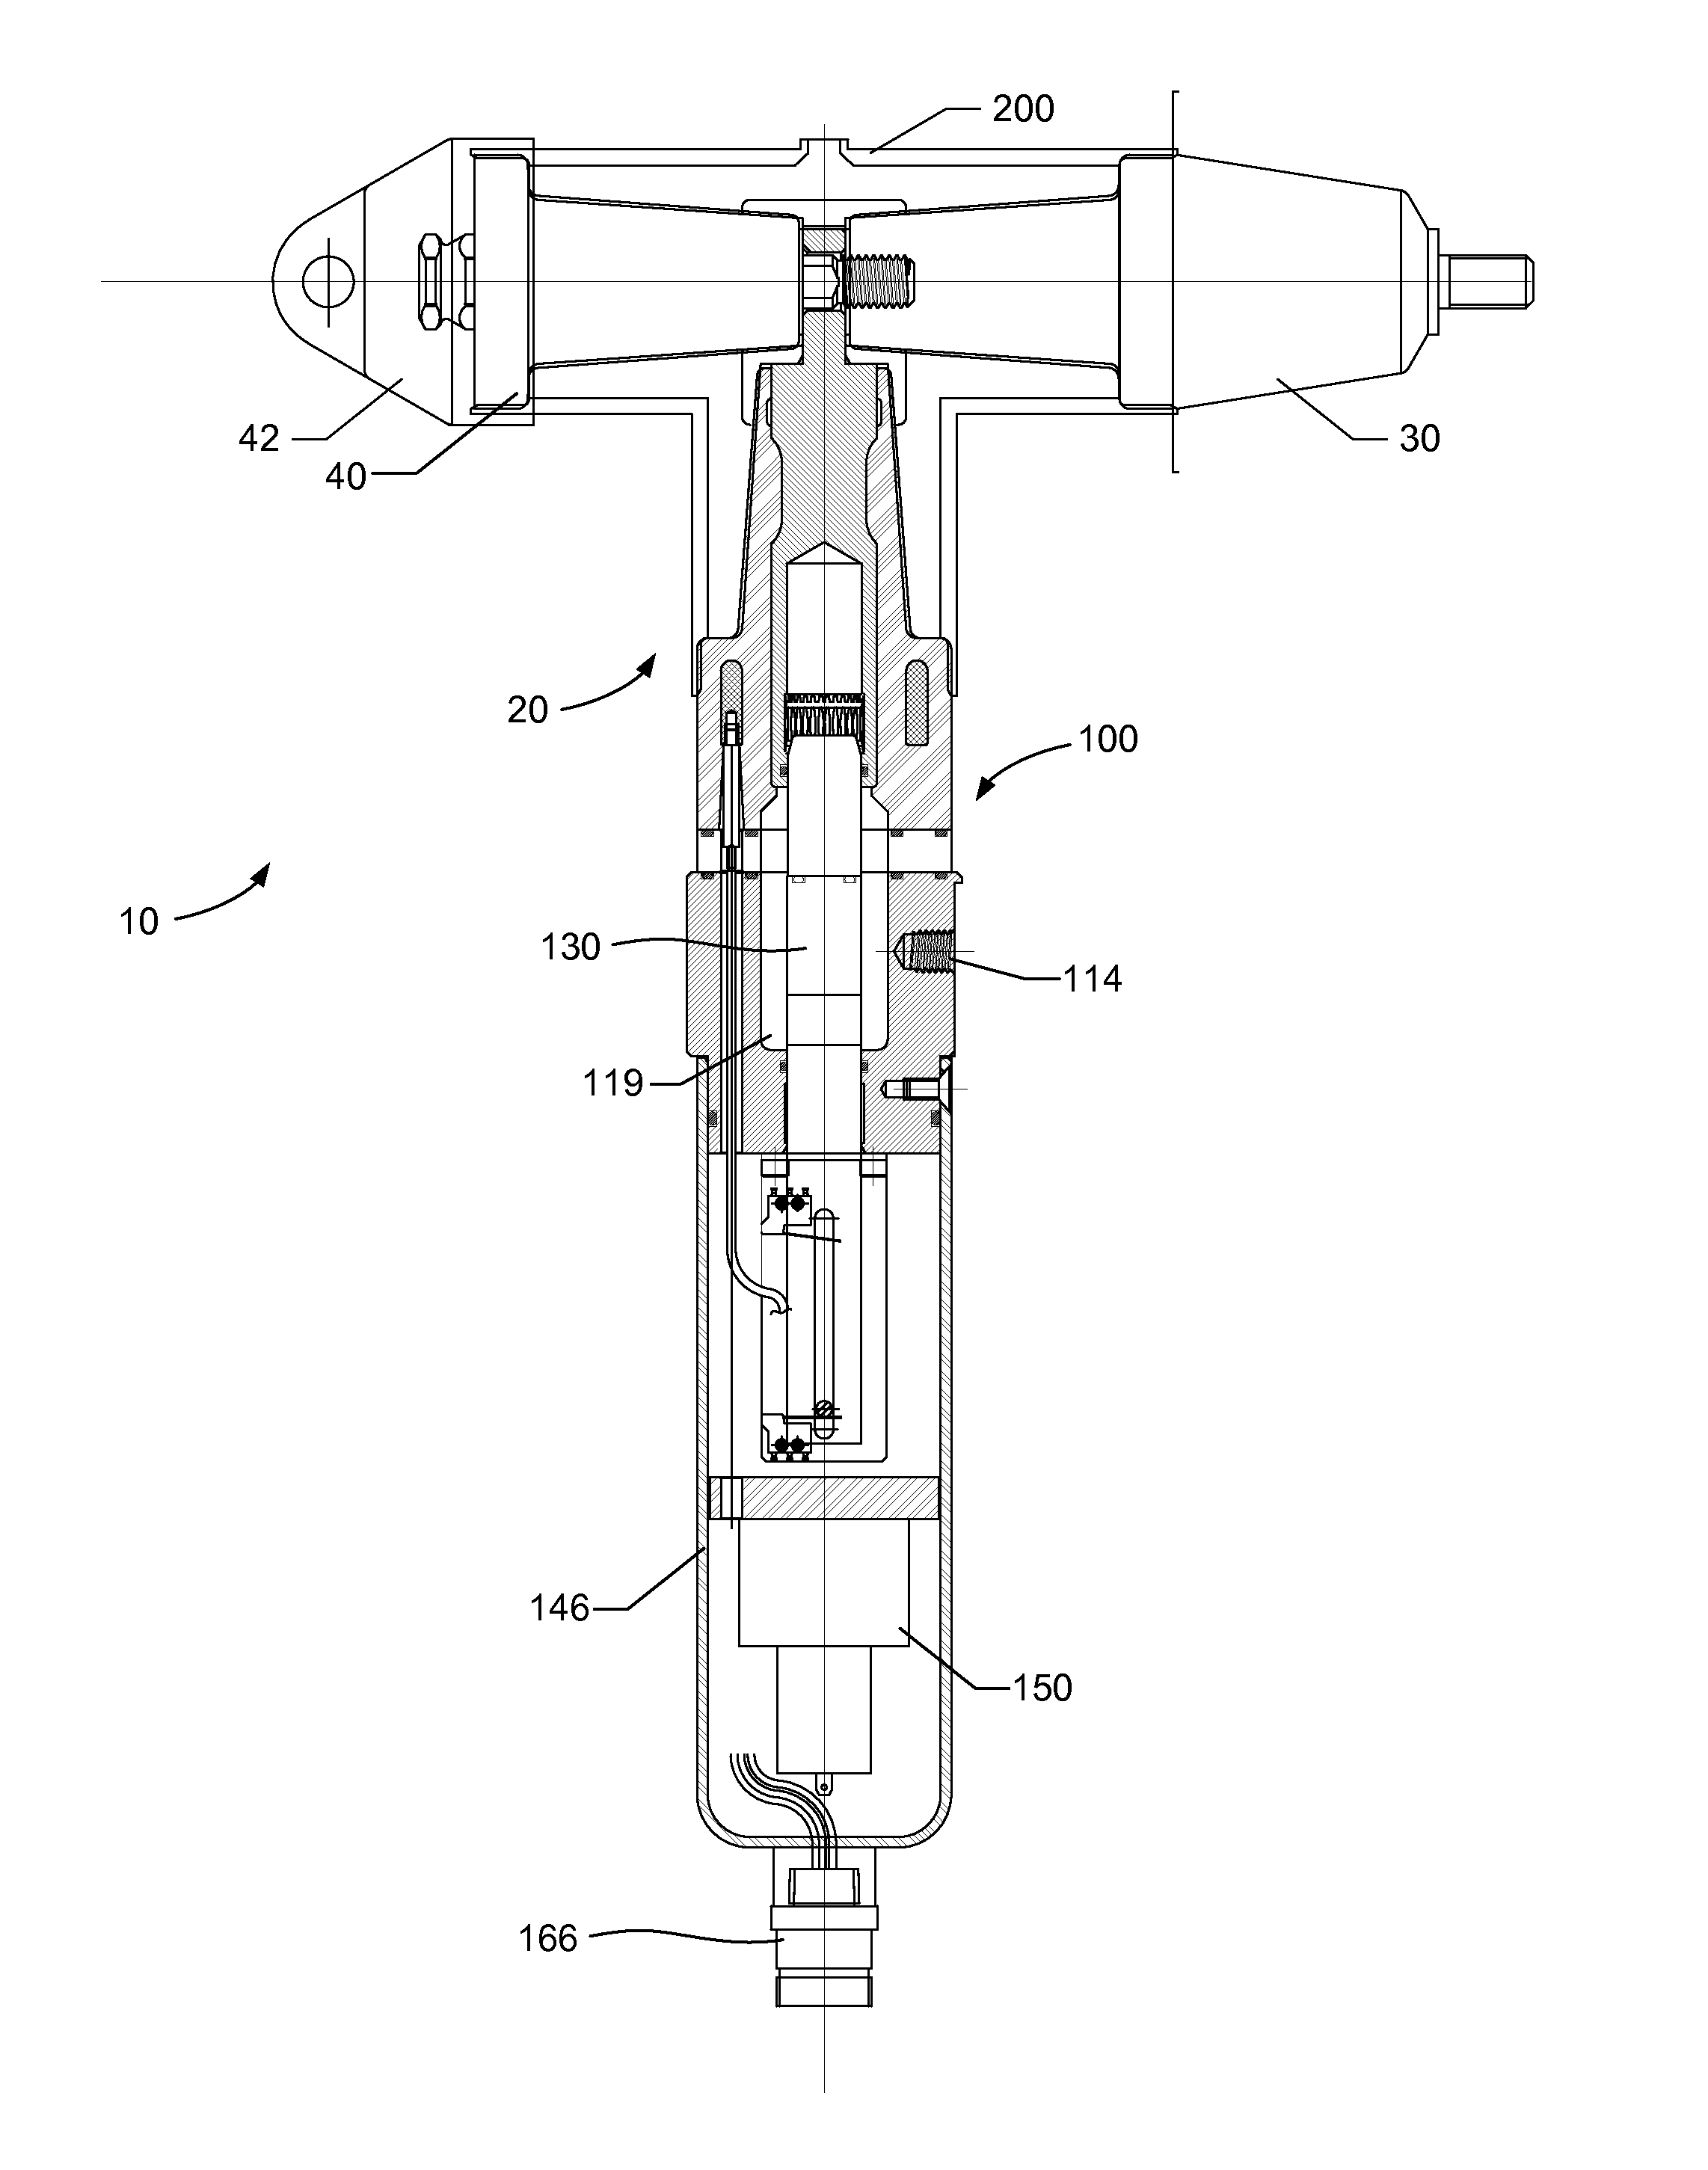 Automated grounding device with visual indication